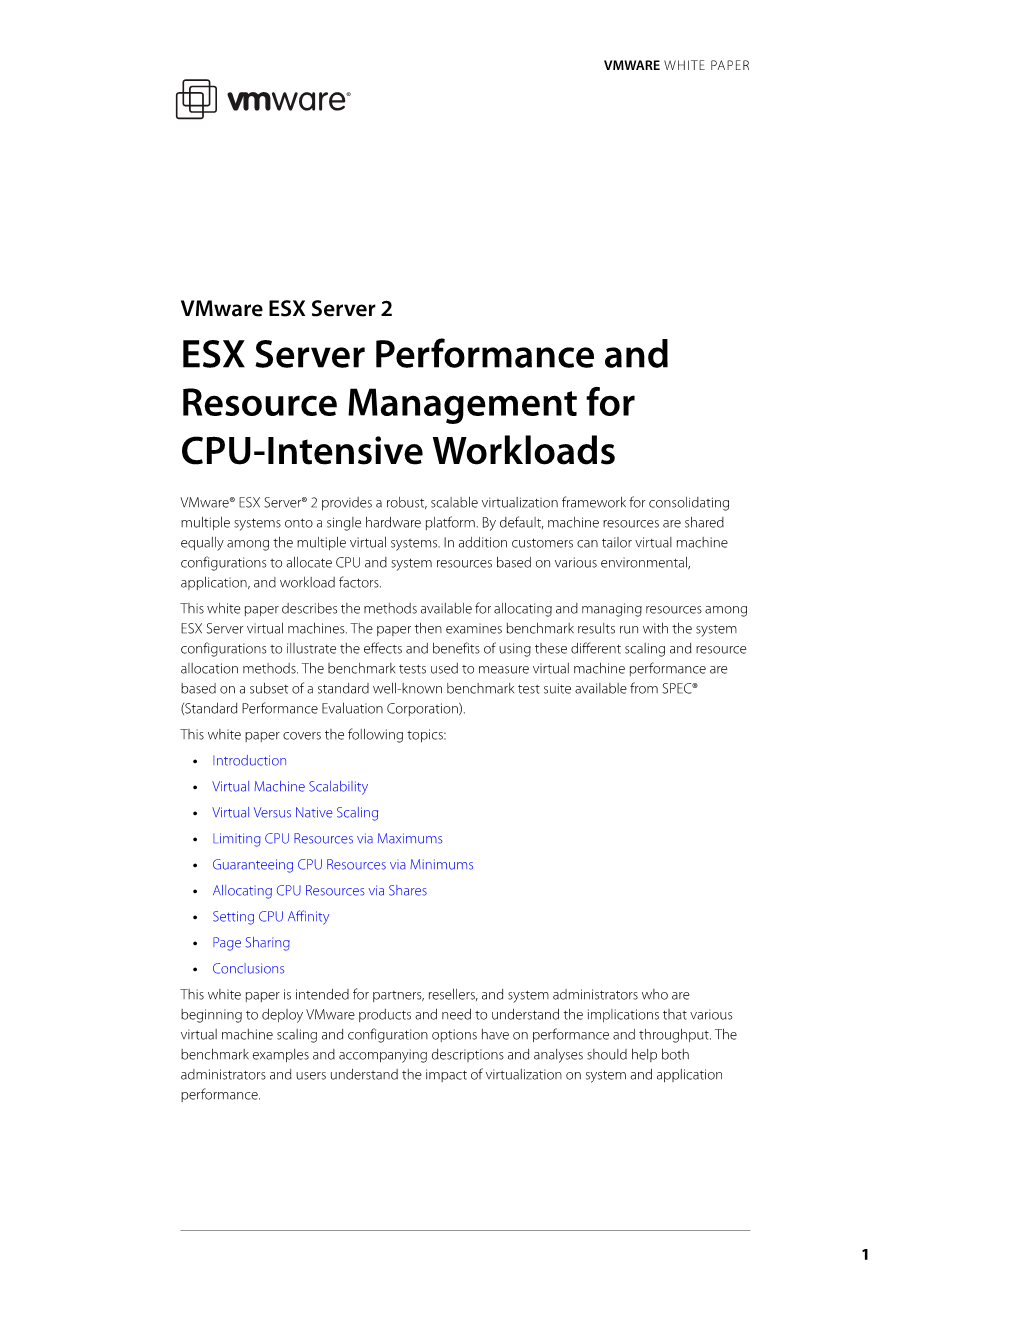 ESX Server Performance and Resource Management for CPU-Intensive Workloads